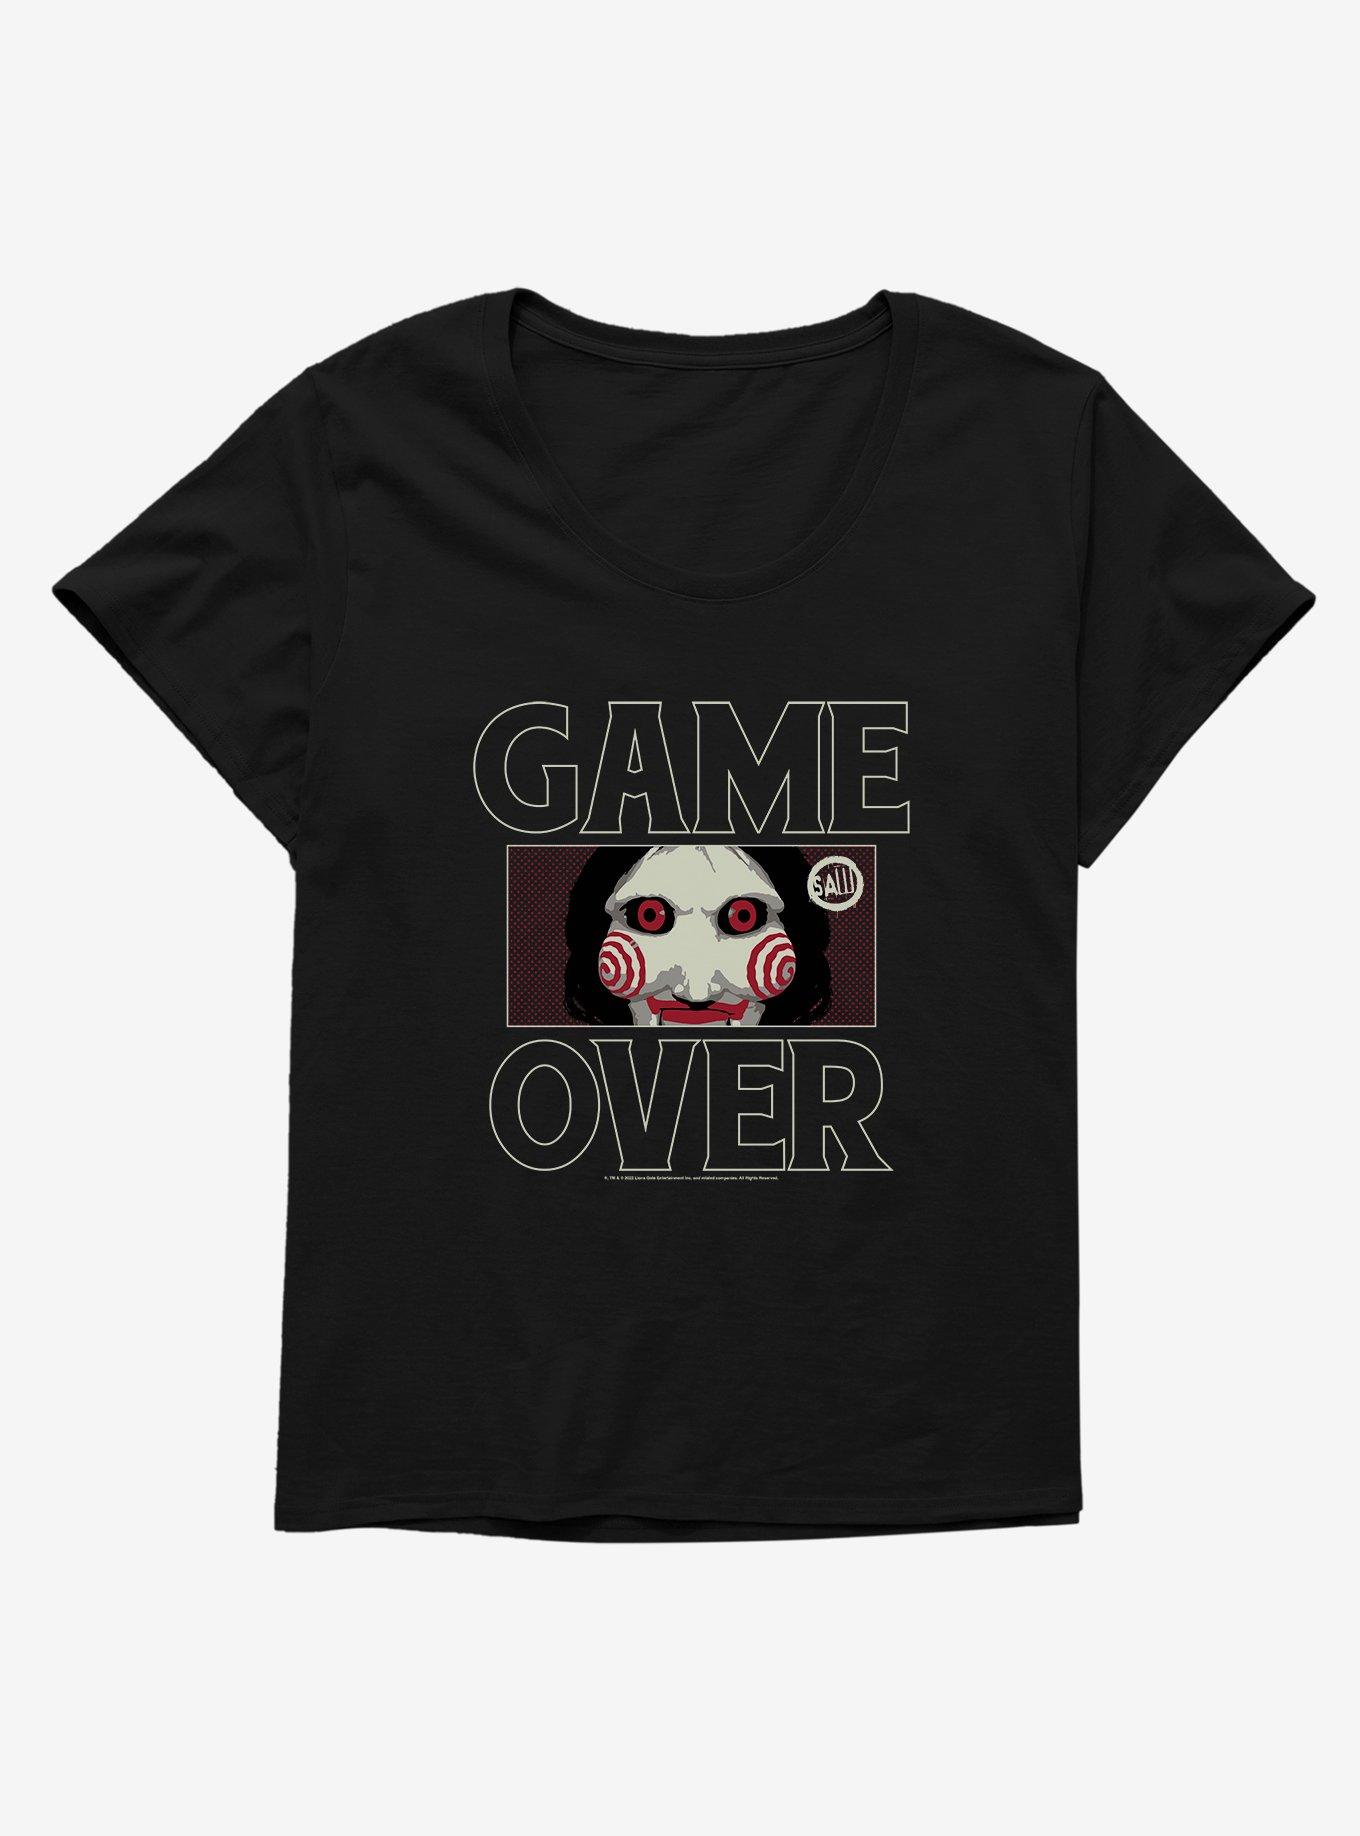 Saw Game Over Girls T-Shirt Plus Size, BLACK, hi-res